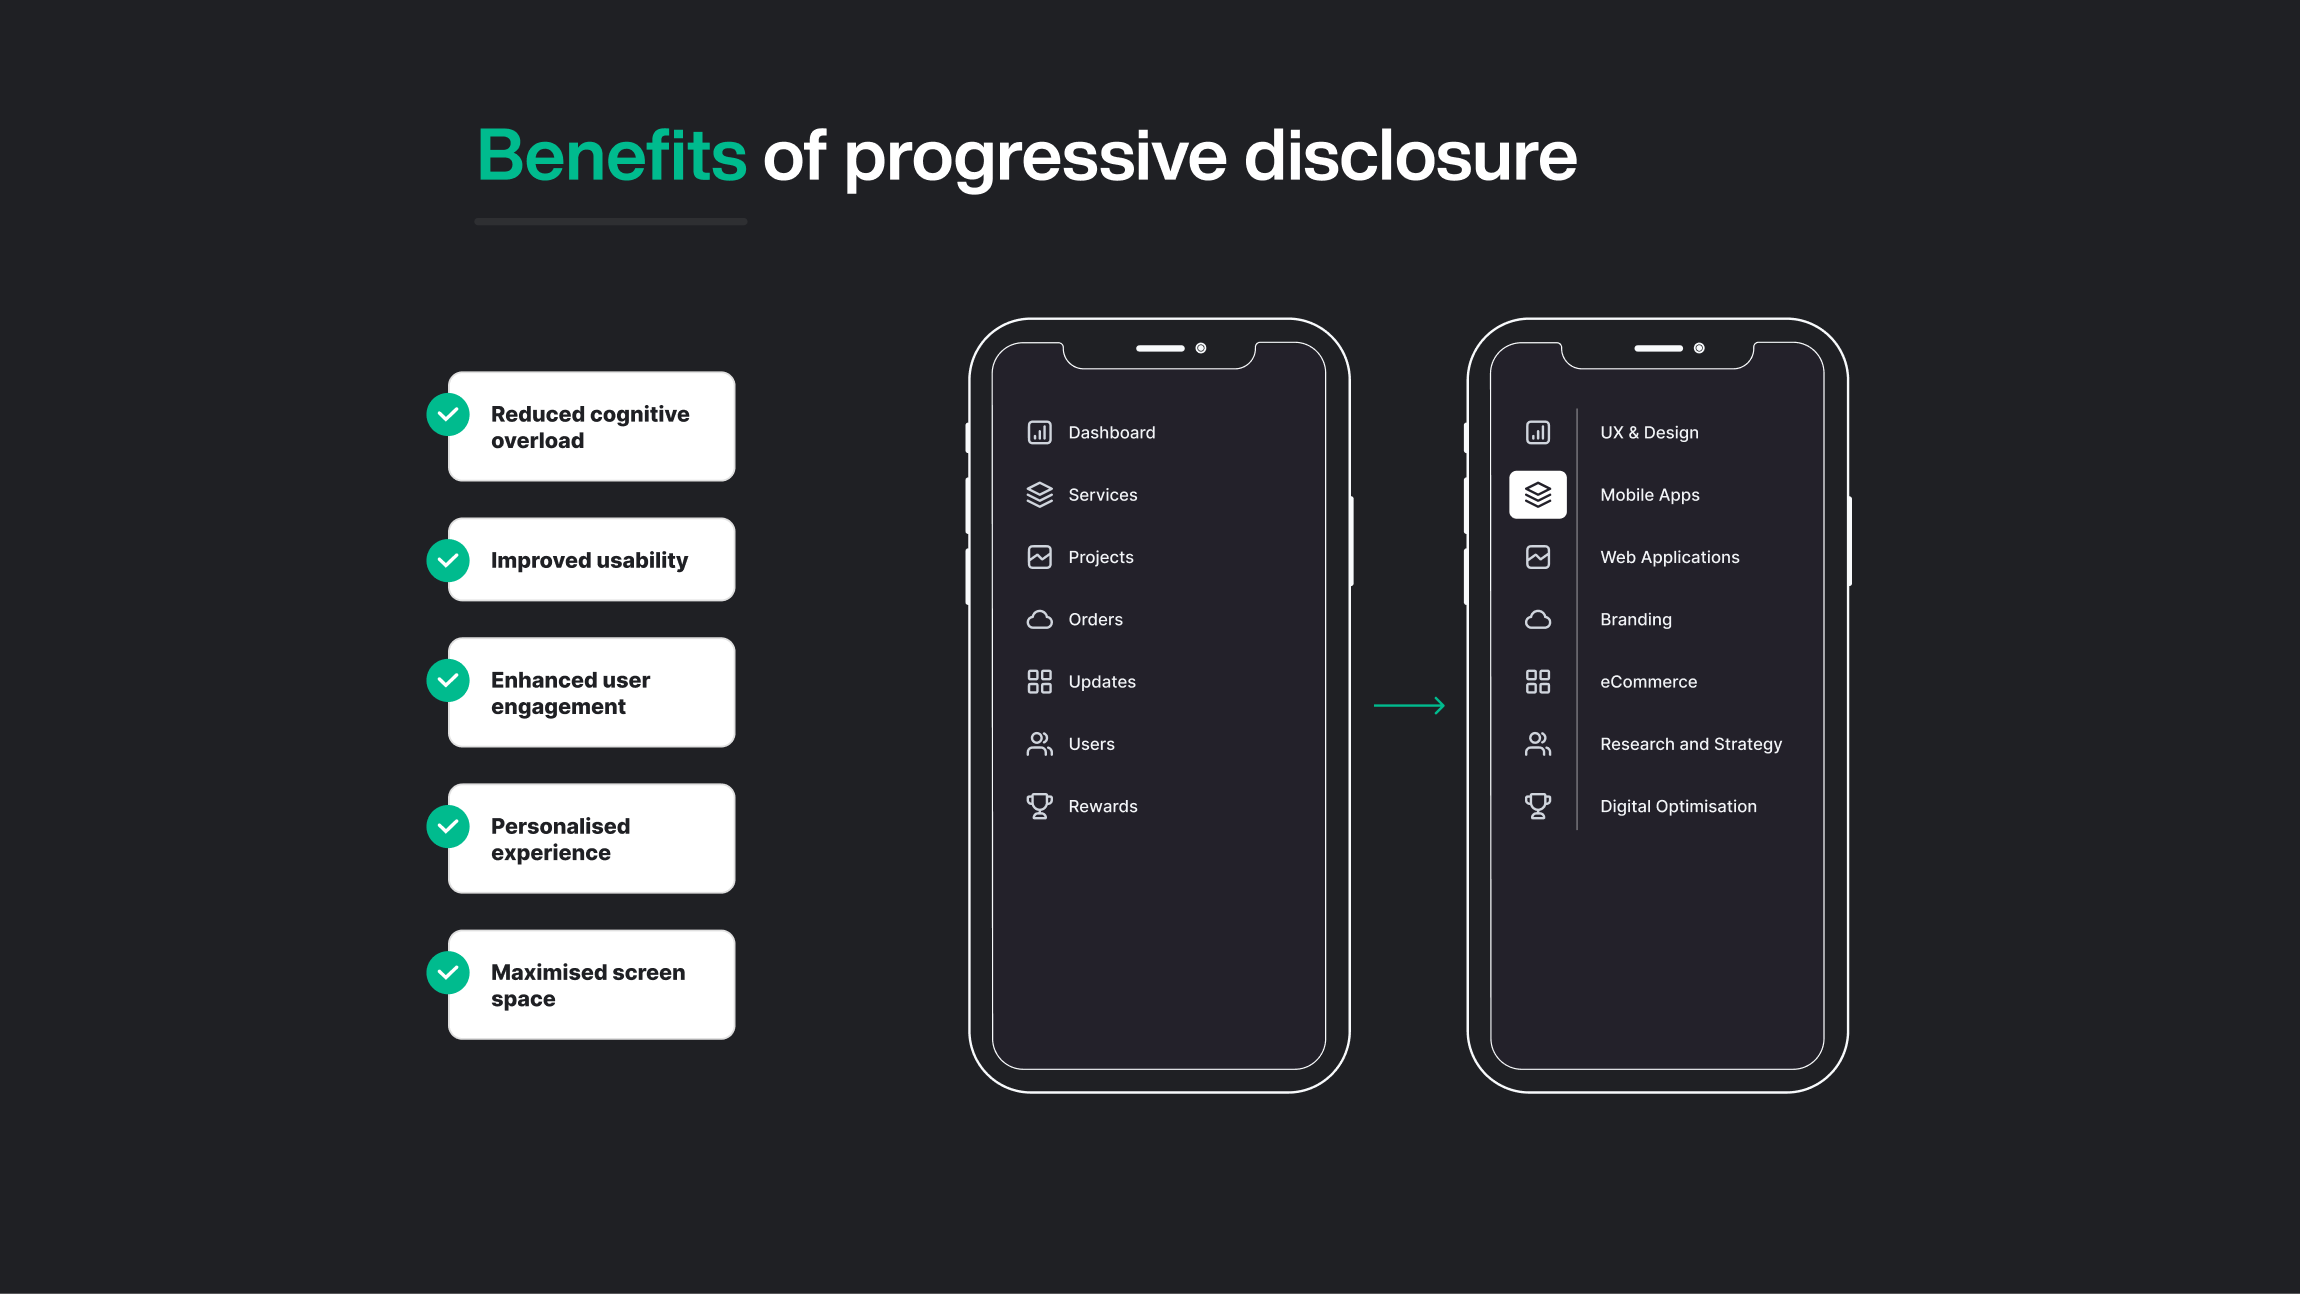 A diagram showing five benefits of progressive disclosure: 1. Reduce cognitive overload, 2. Improved usability, 3. Enhanced user engagement, 4. Personalised experience, 5. Maximised screen space.